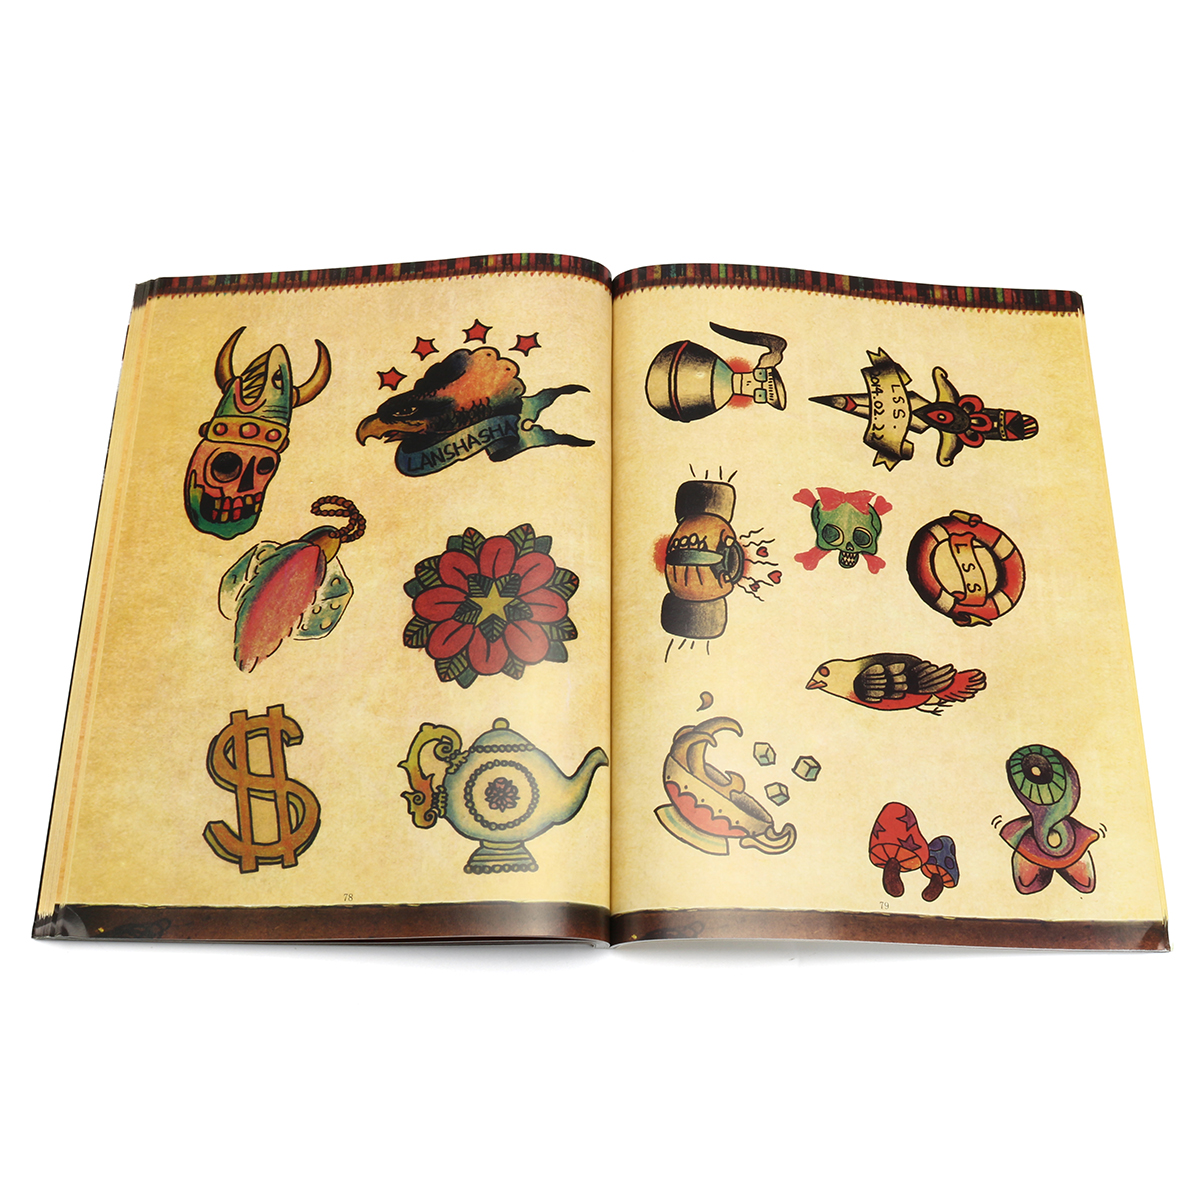 Traditional-Chinese-Traditional-Elements-Of-108-Pages-Of-Tattoo-Design-Flash-Book-1664910-8